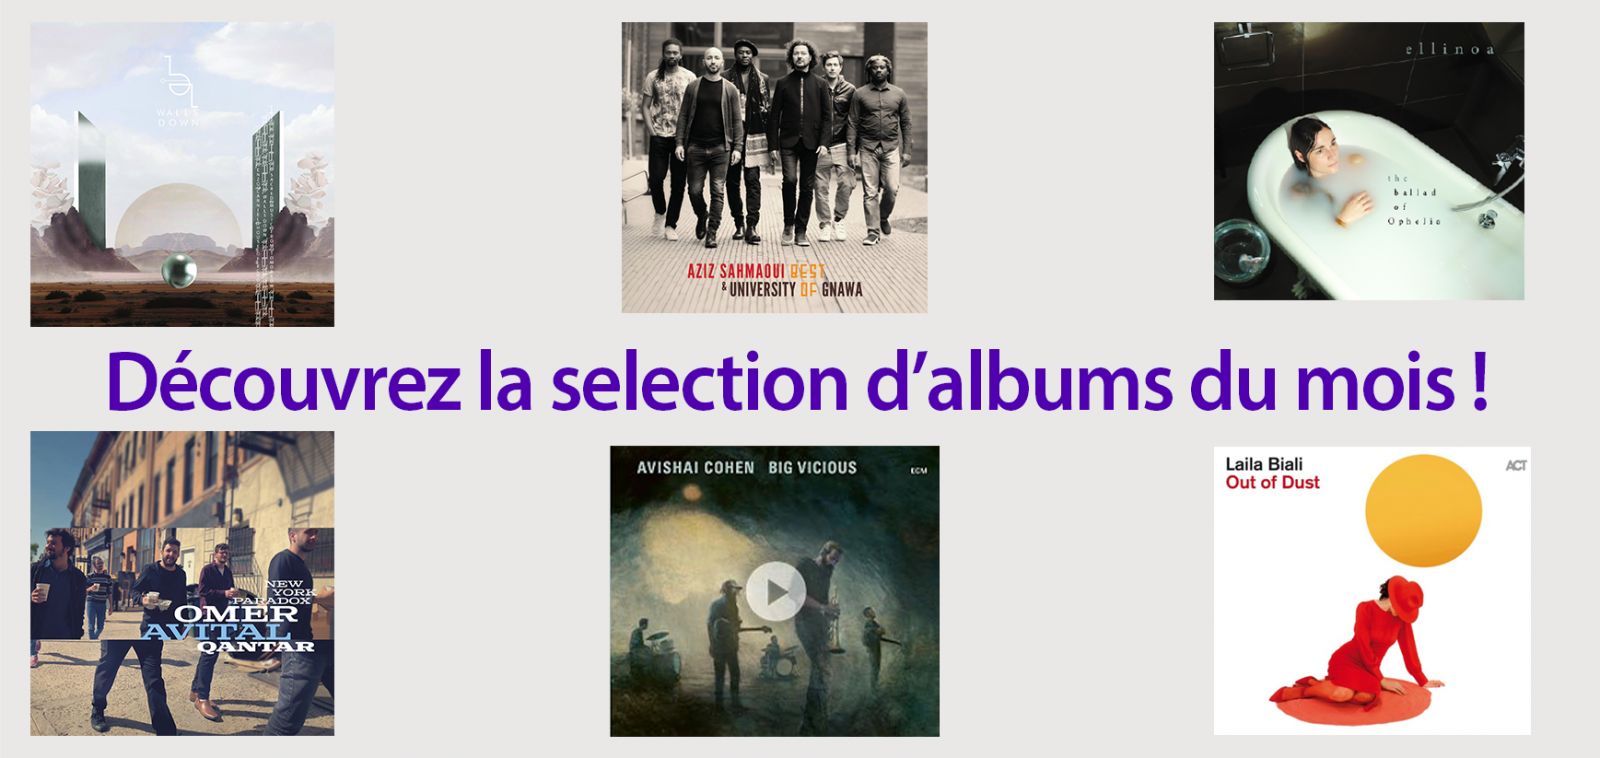 Albums releases April 2020 - Because they spent months preparing them and making them jewels for our ears, the Paris Jazz Club couldn't ignore, despite the exceptional situation, the albums of these artists. All for digital sale.